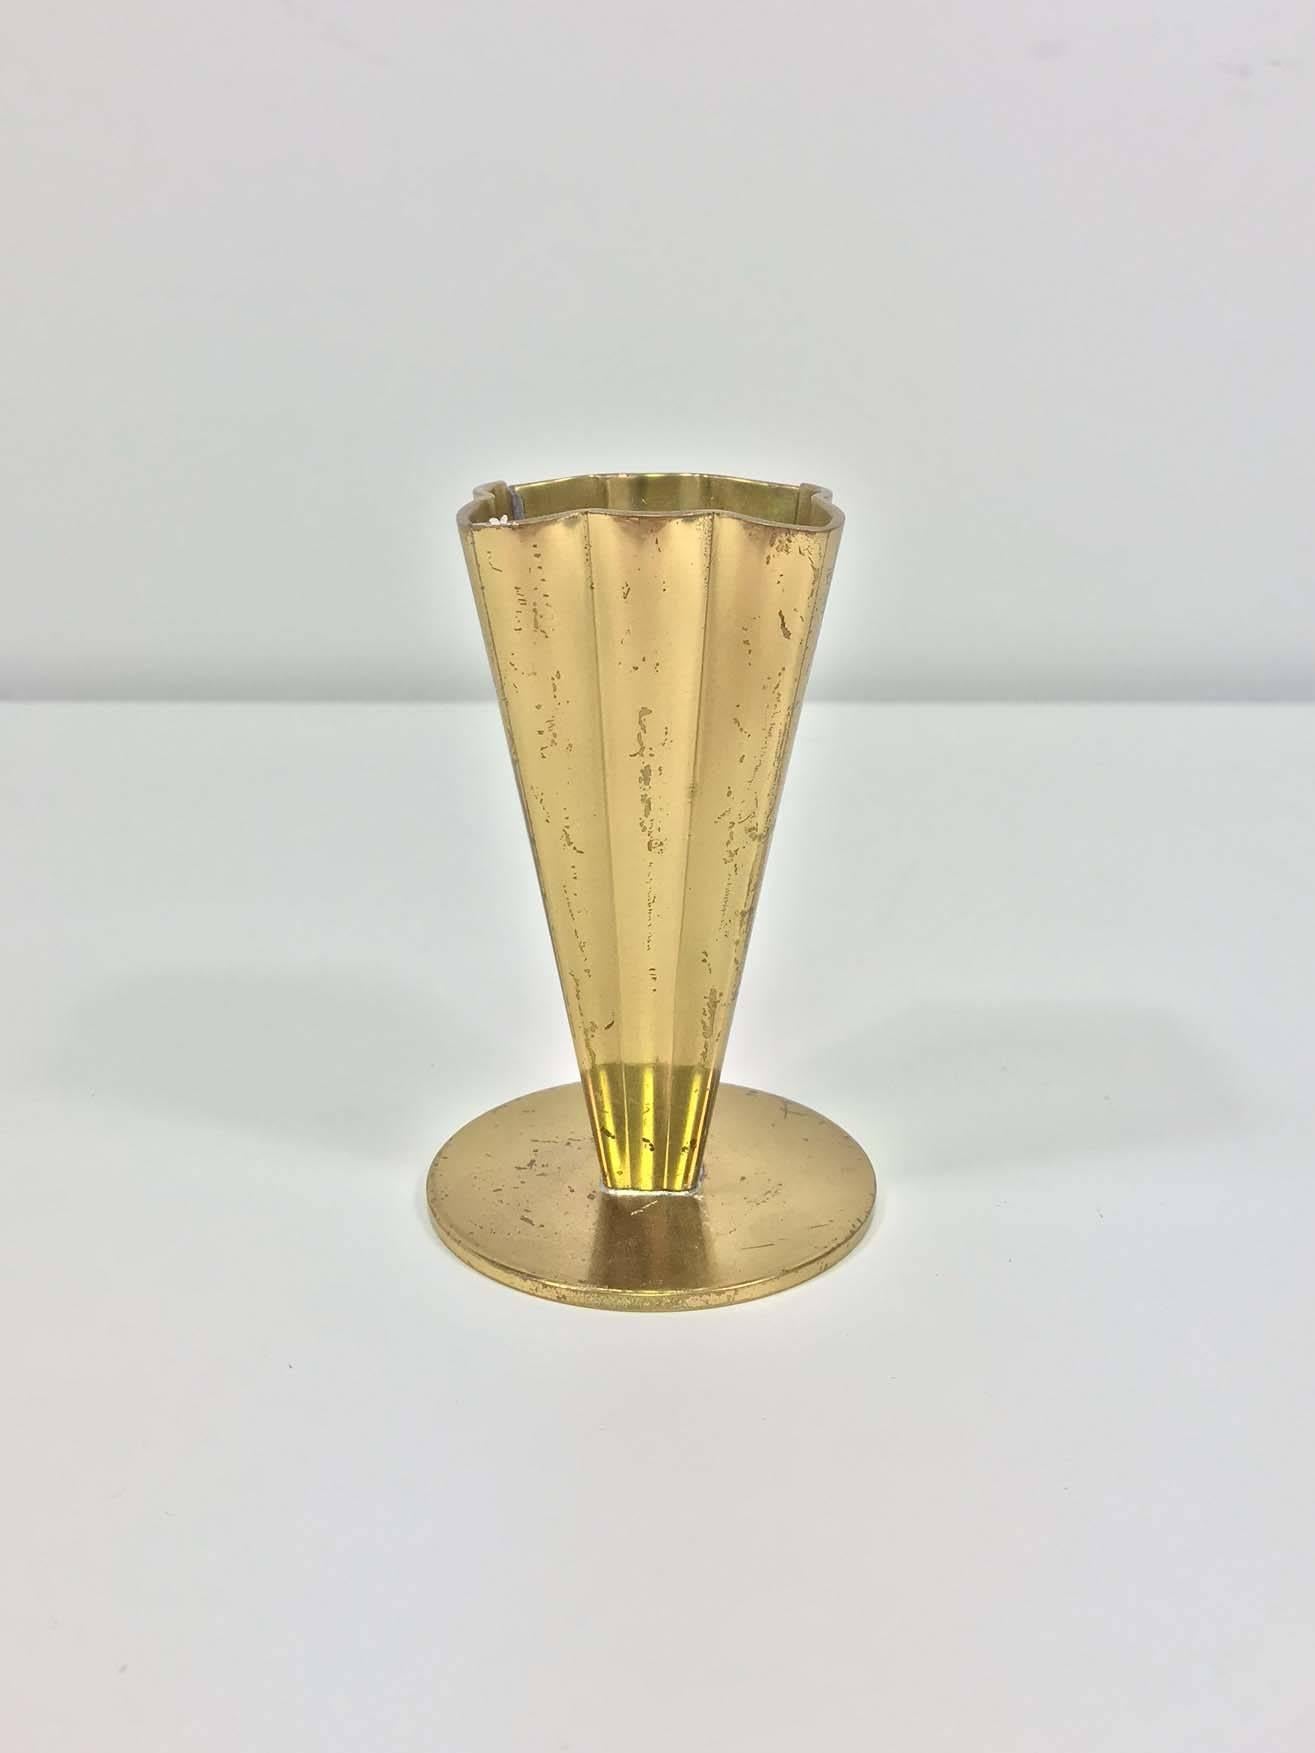 A small brass Ystad-Metall vase, minor wear consistent with age and use. Signed at bottom.